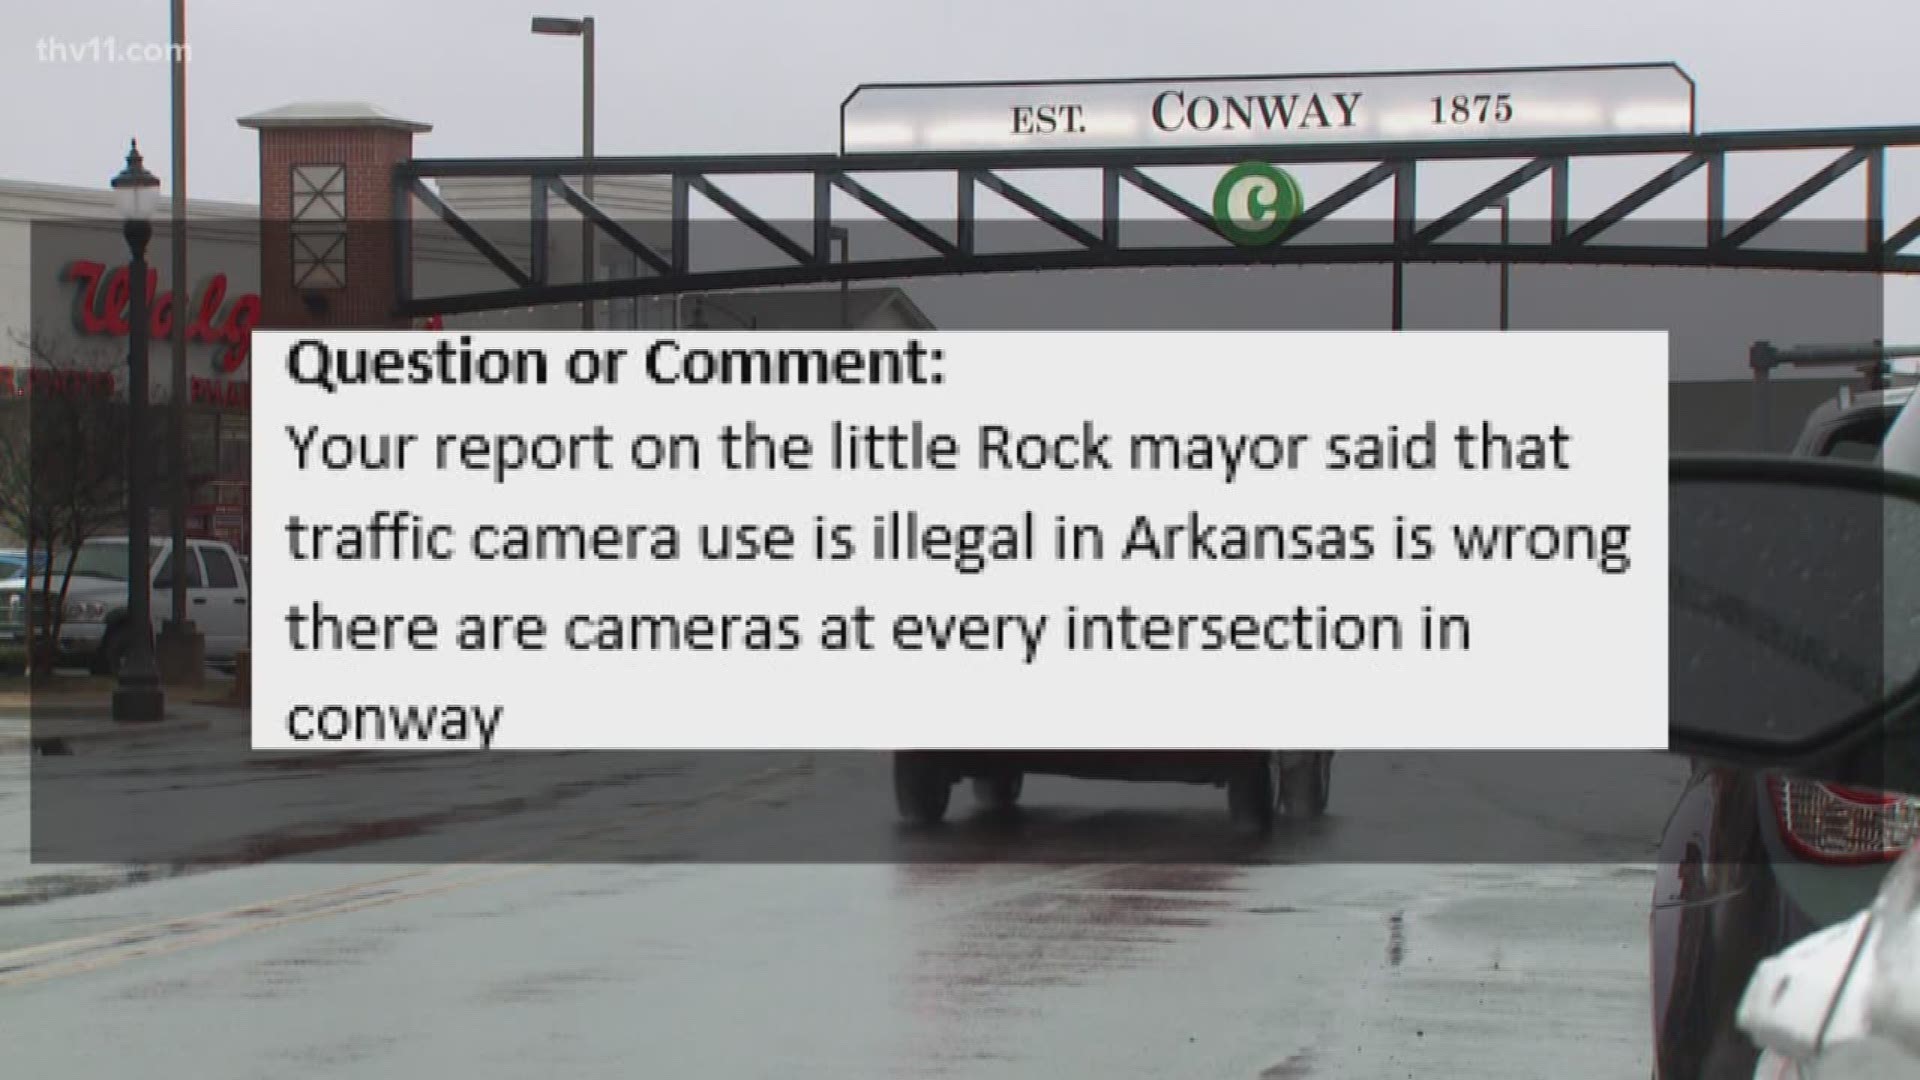 A statement by Little Rock Mayor Mark Stodola has confused Arkansans about the legality of cameras on Arkansas streets.